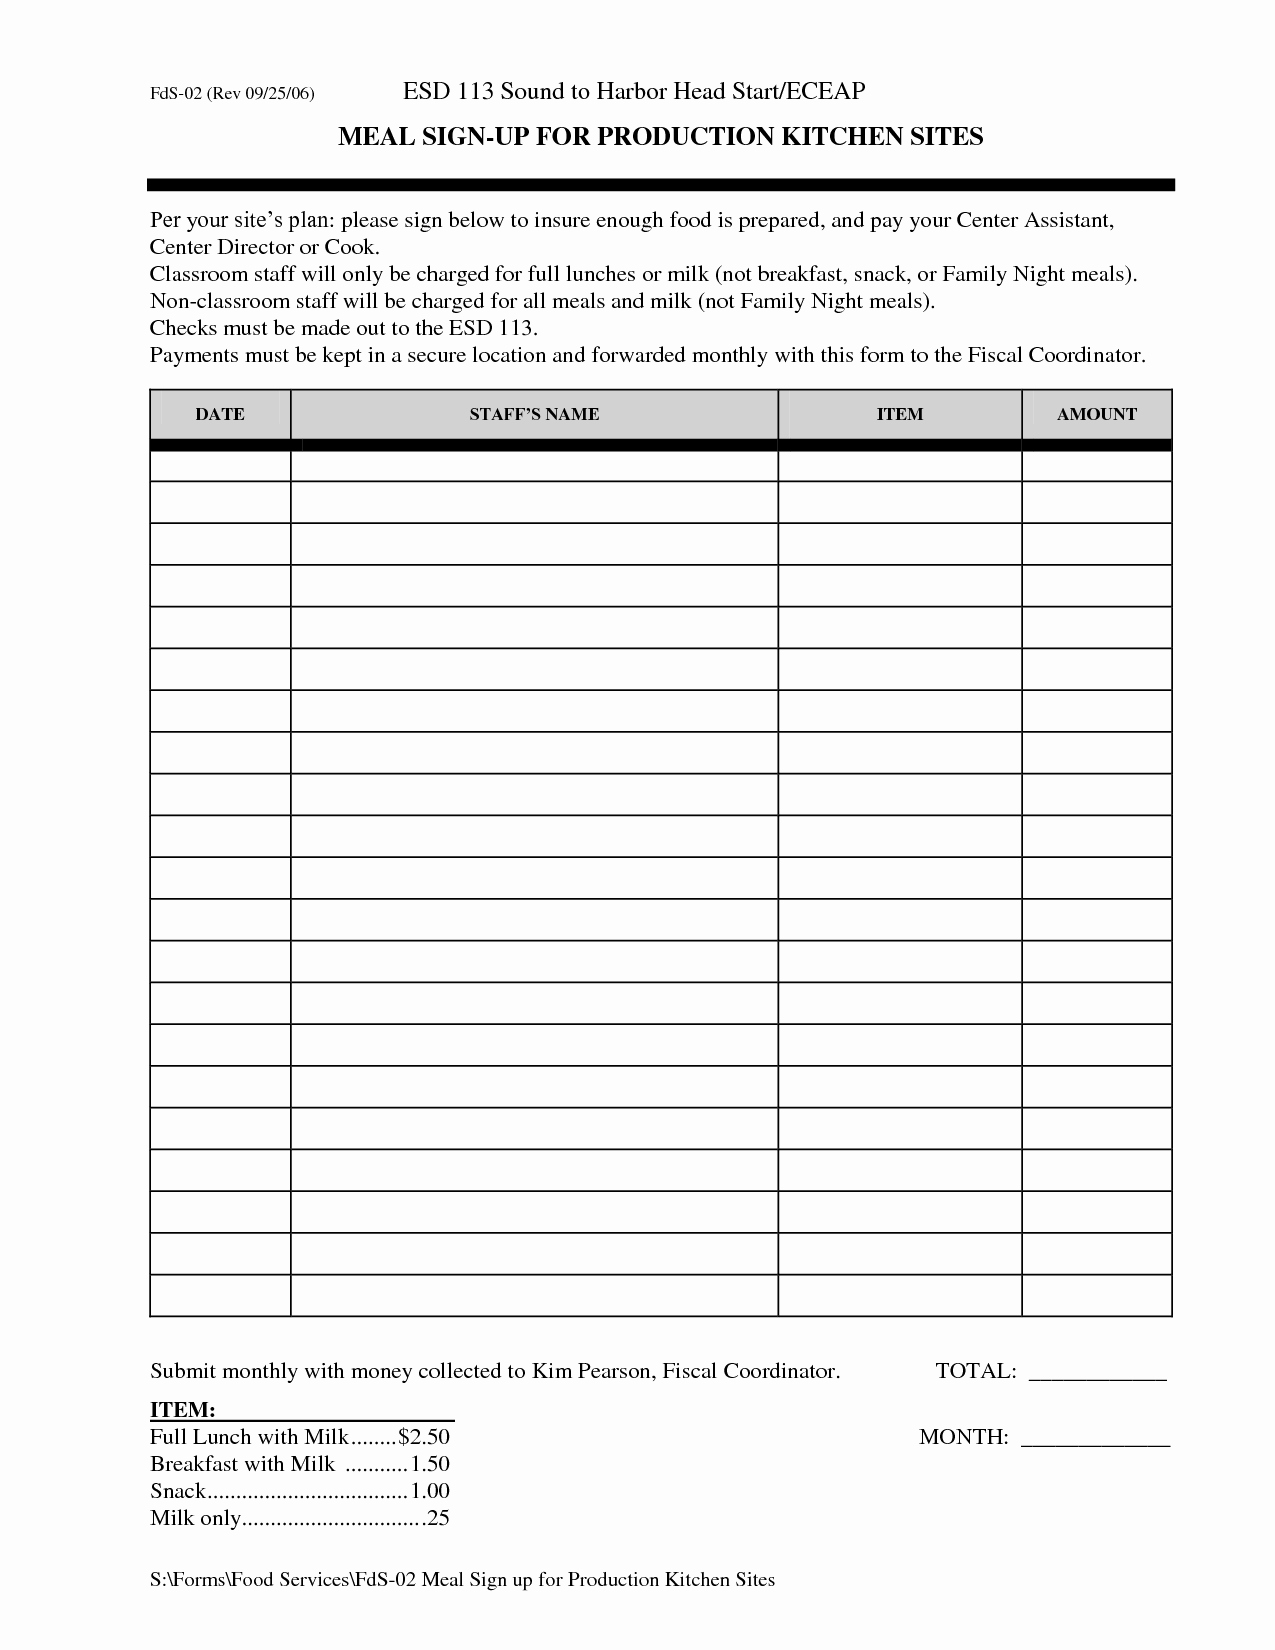 Potluck Sign Up Sheet Template Awesome Meal Sign Up Sheet Template